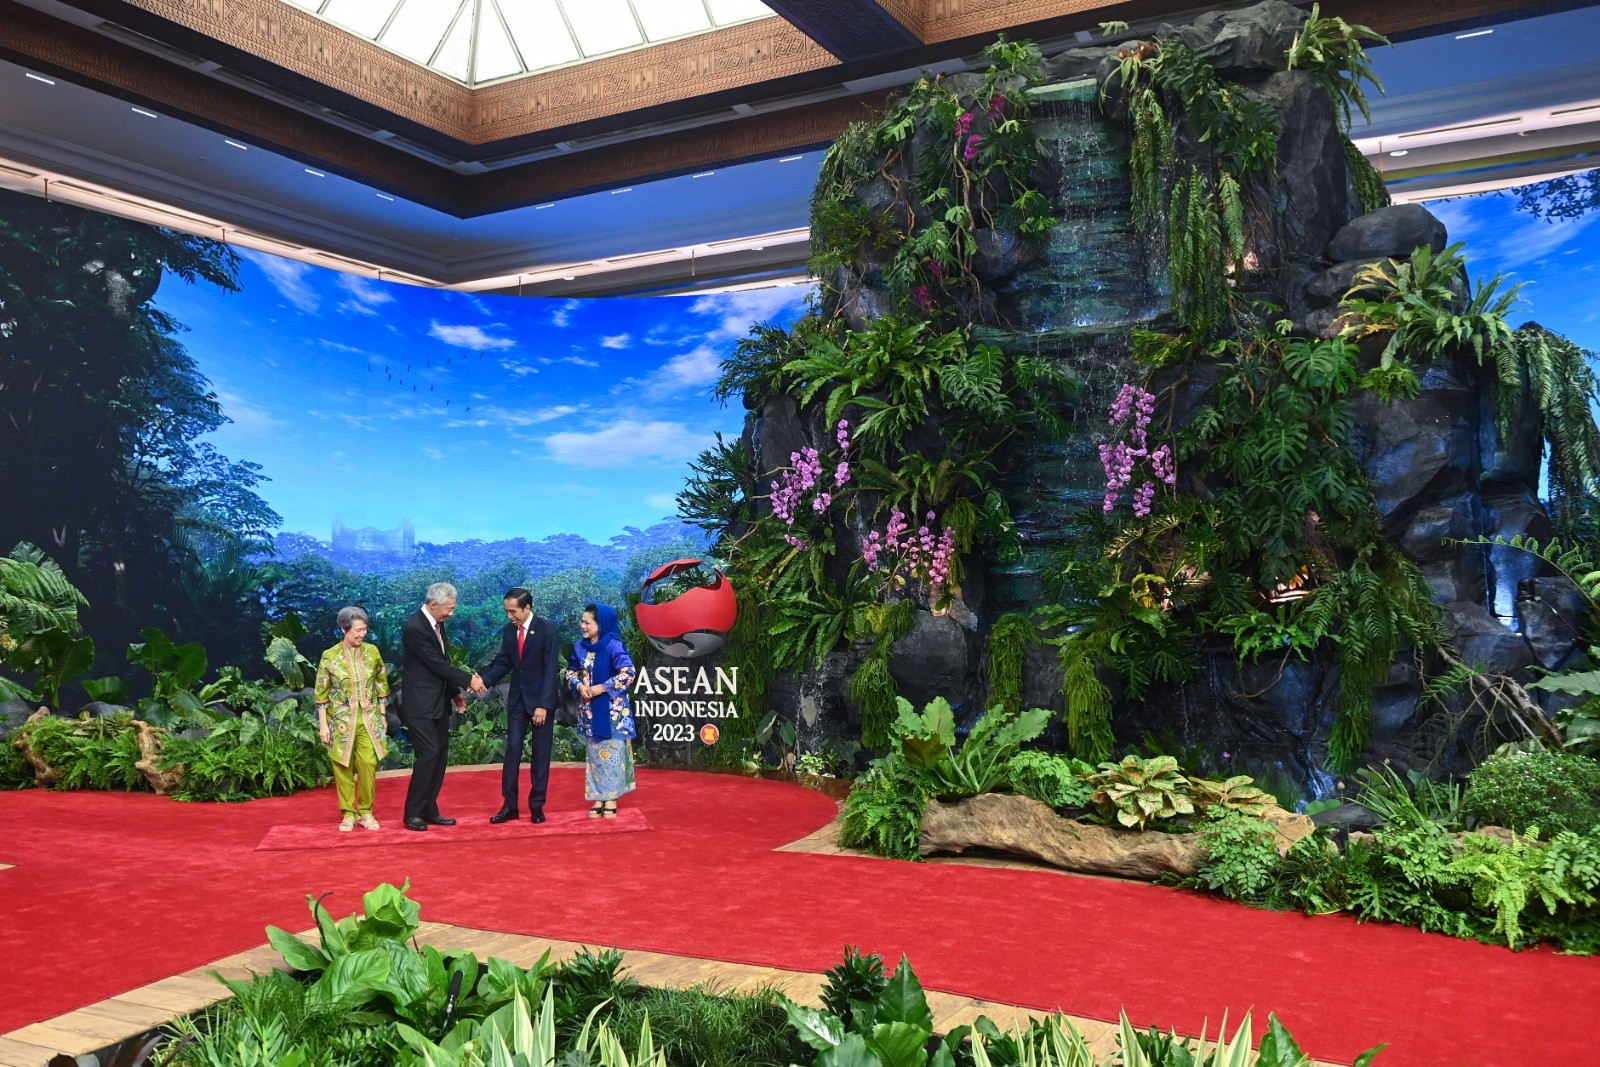 The Symbolism Behind the Waterfall at the 43rd ASEAN Summit Welcoming Area